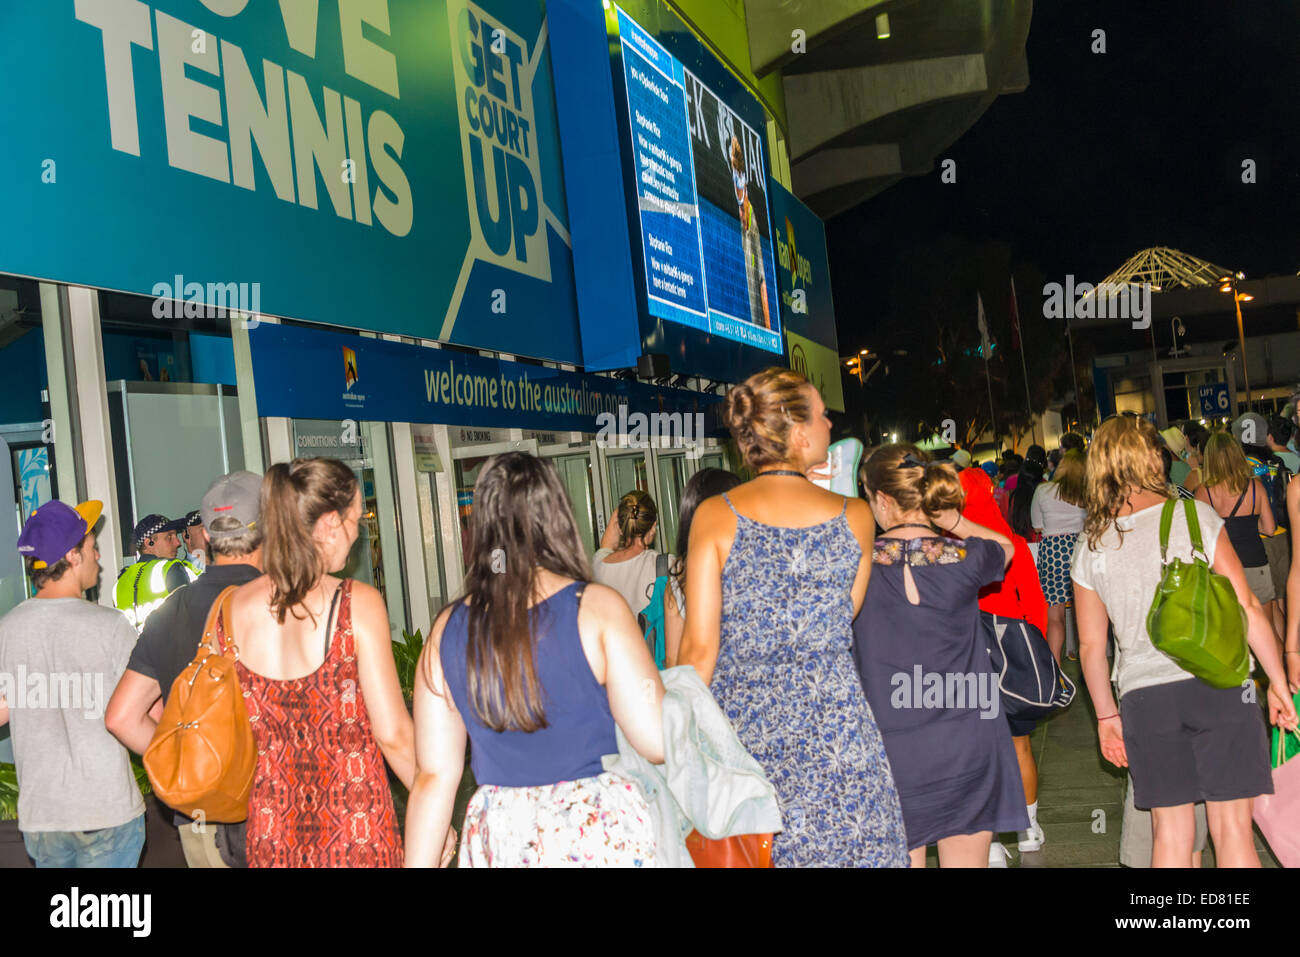 tennis australian open rod lever arena fans outside after match on way home Stock Photo